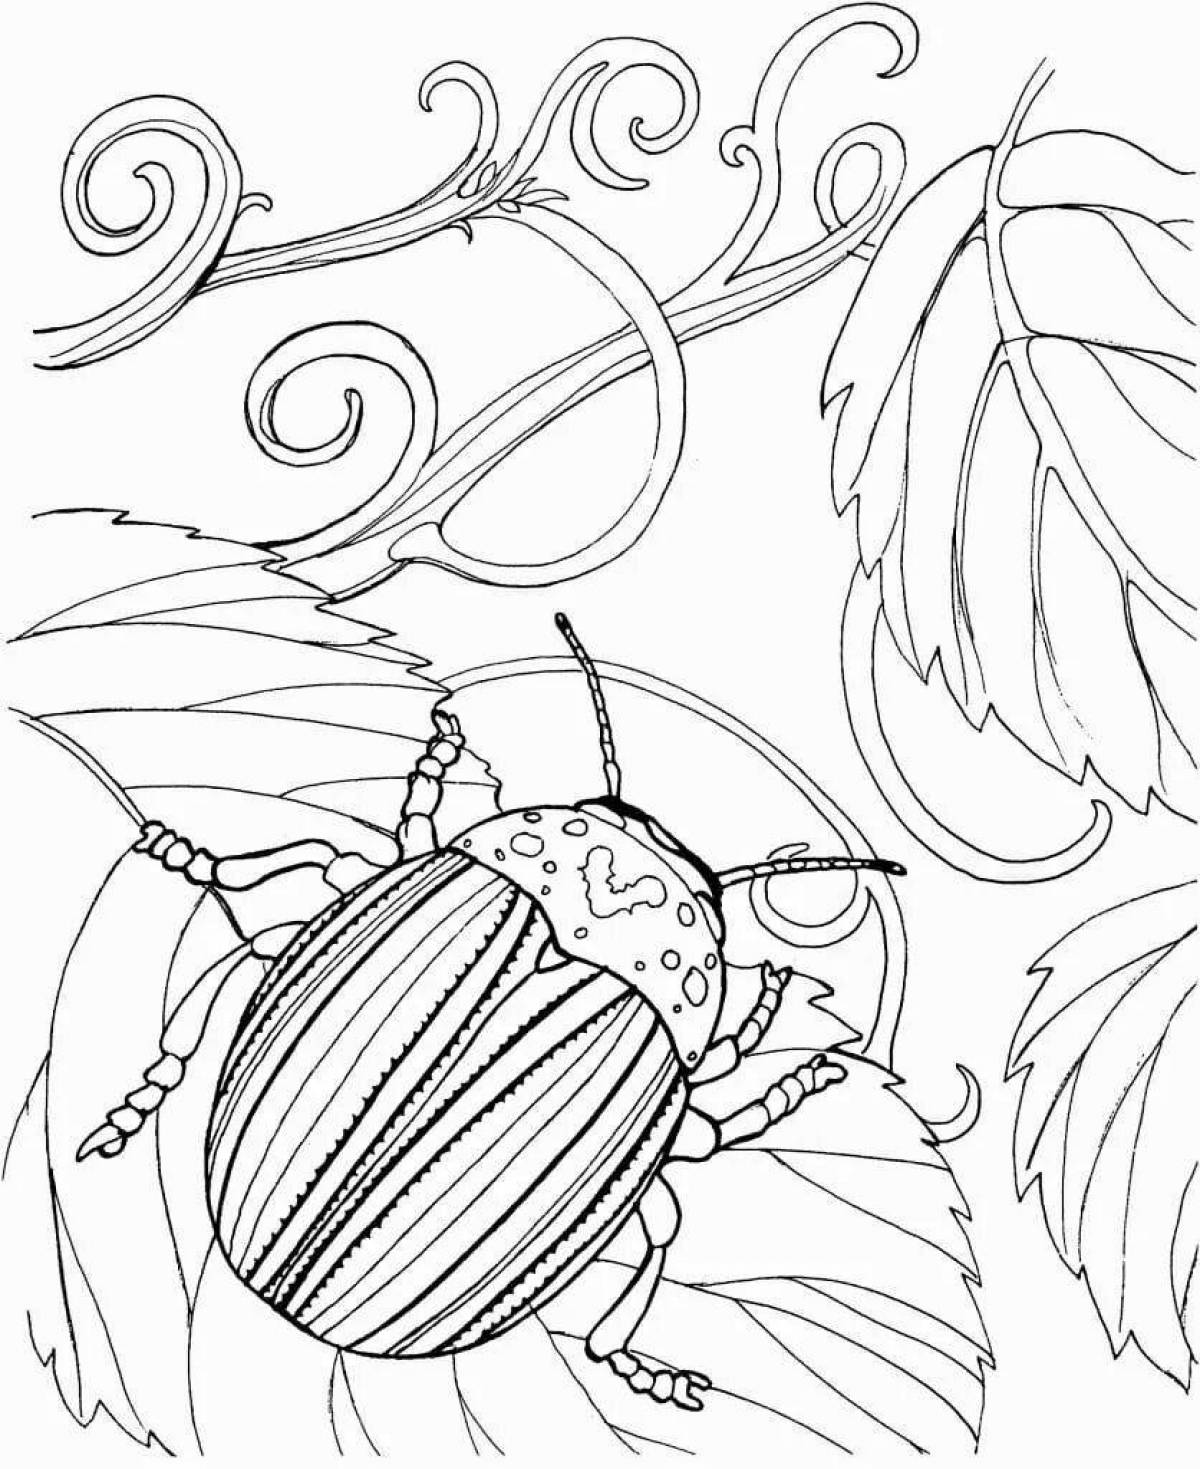 Creative insect coloring pages for 6-7 year olds